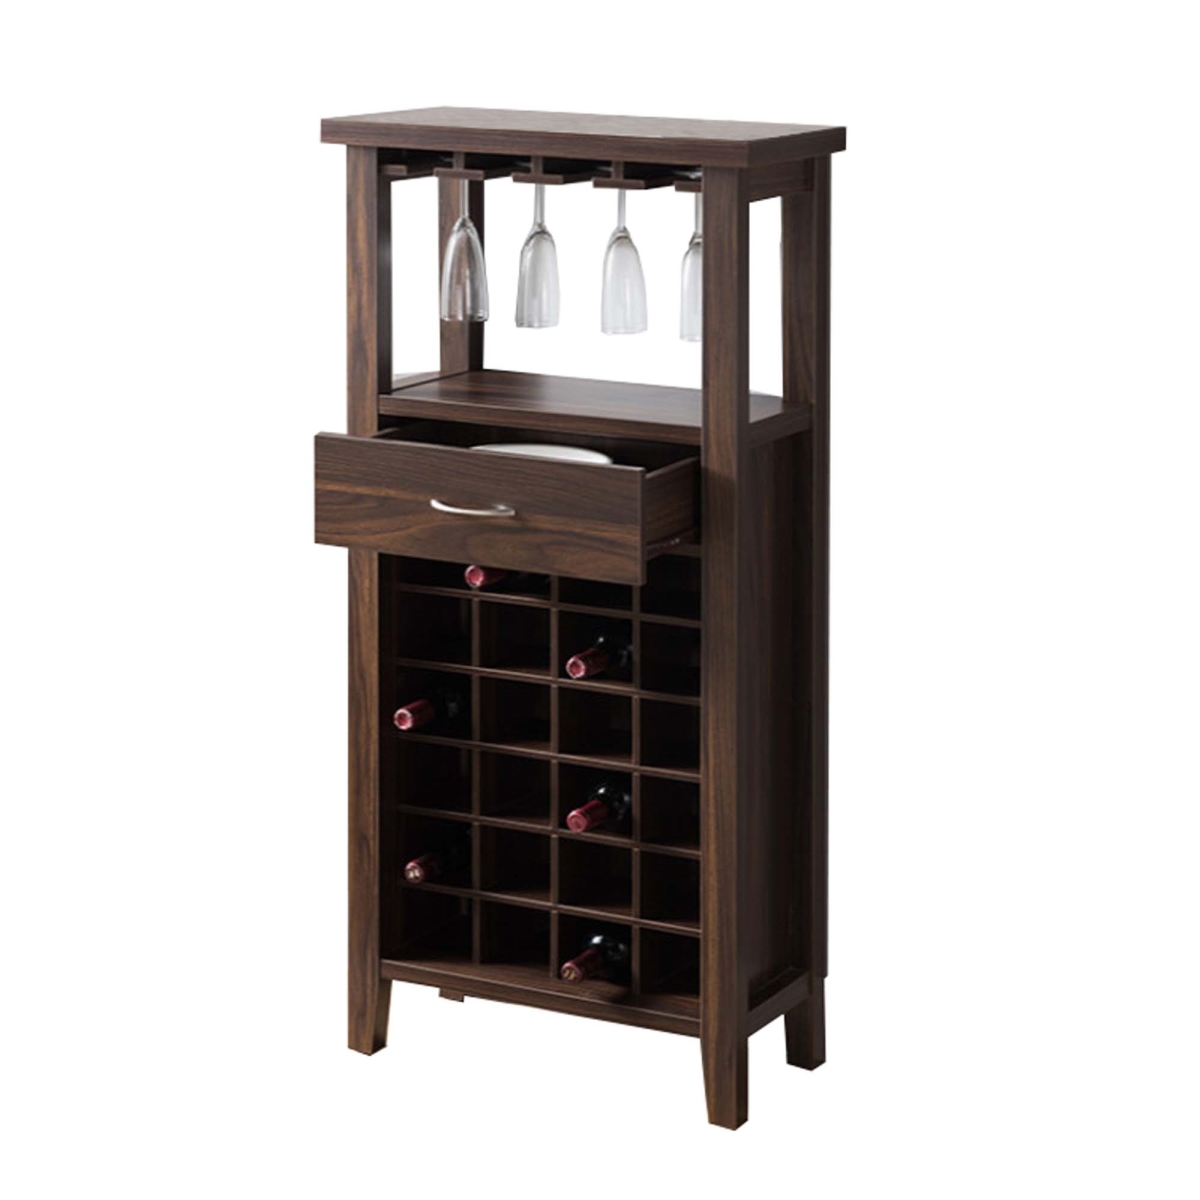 352103 Wooden Wine Cabinet With One Drawer & Wine Compartment, Walnut Brown